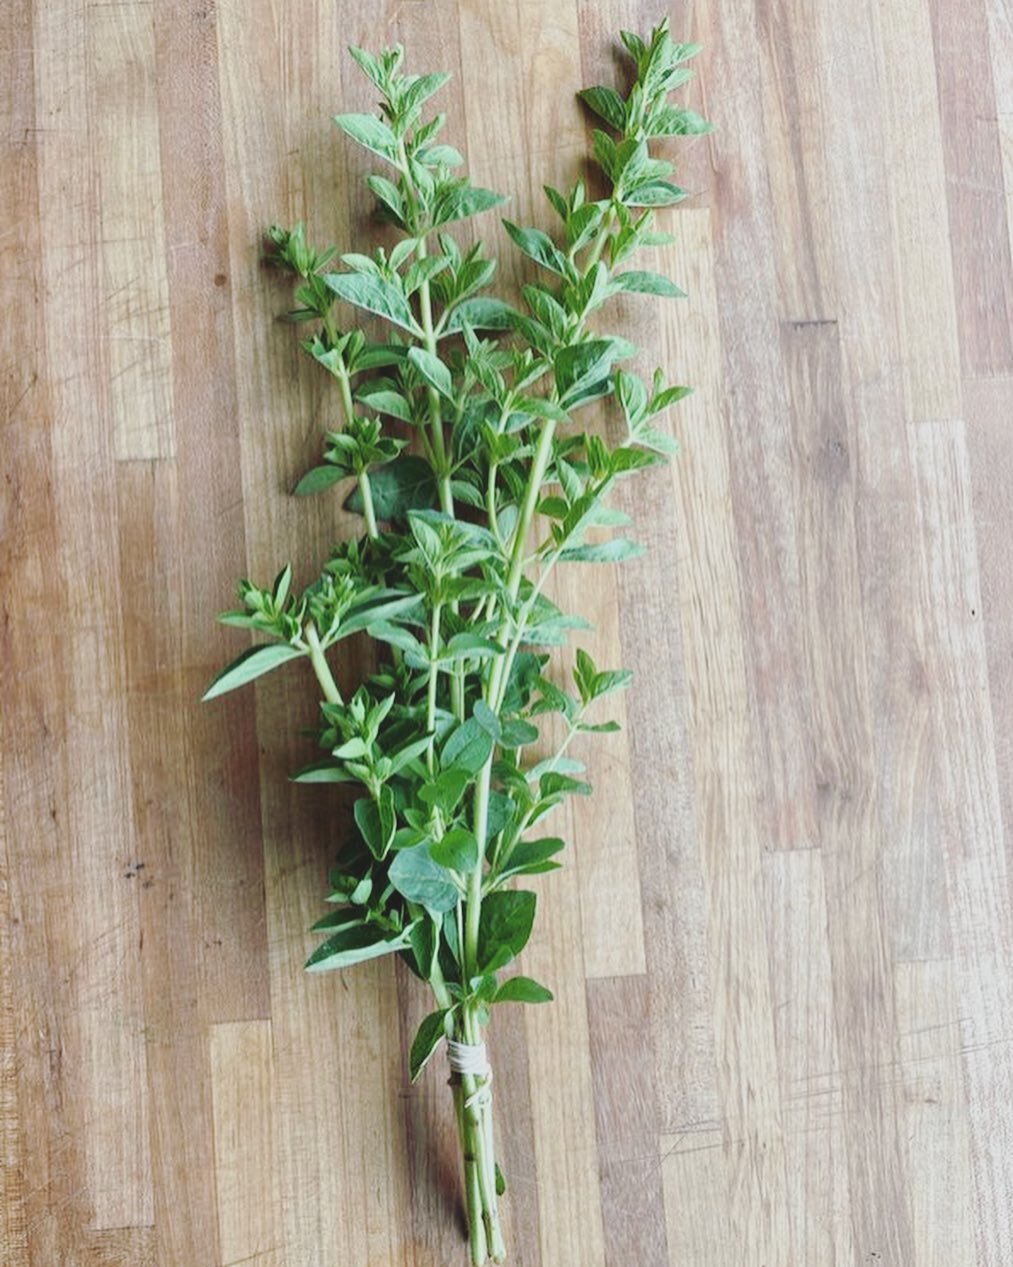 Delicious aromatics available this week! Fresh oregano &amp; garlic scapes from @posterityfarm pack a serious nutritious punch &amp; make excellent ingredients for fresh spring chimichurri, pasta sauce, pizza toppings, meat marinades &amp; more ✨
..
